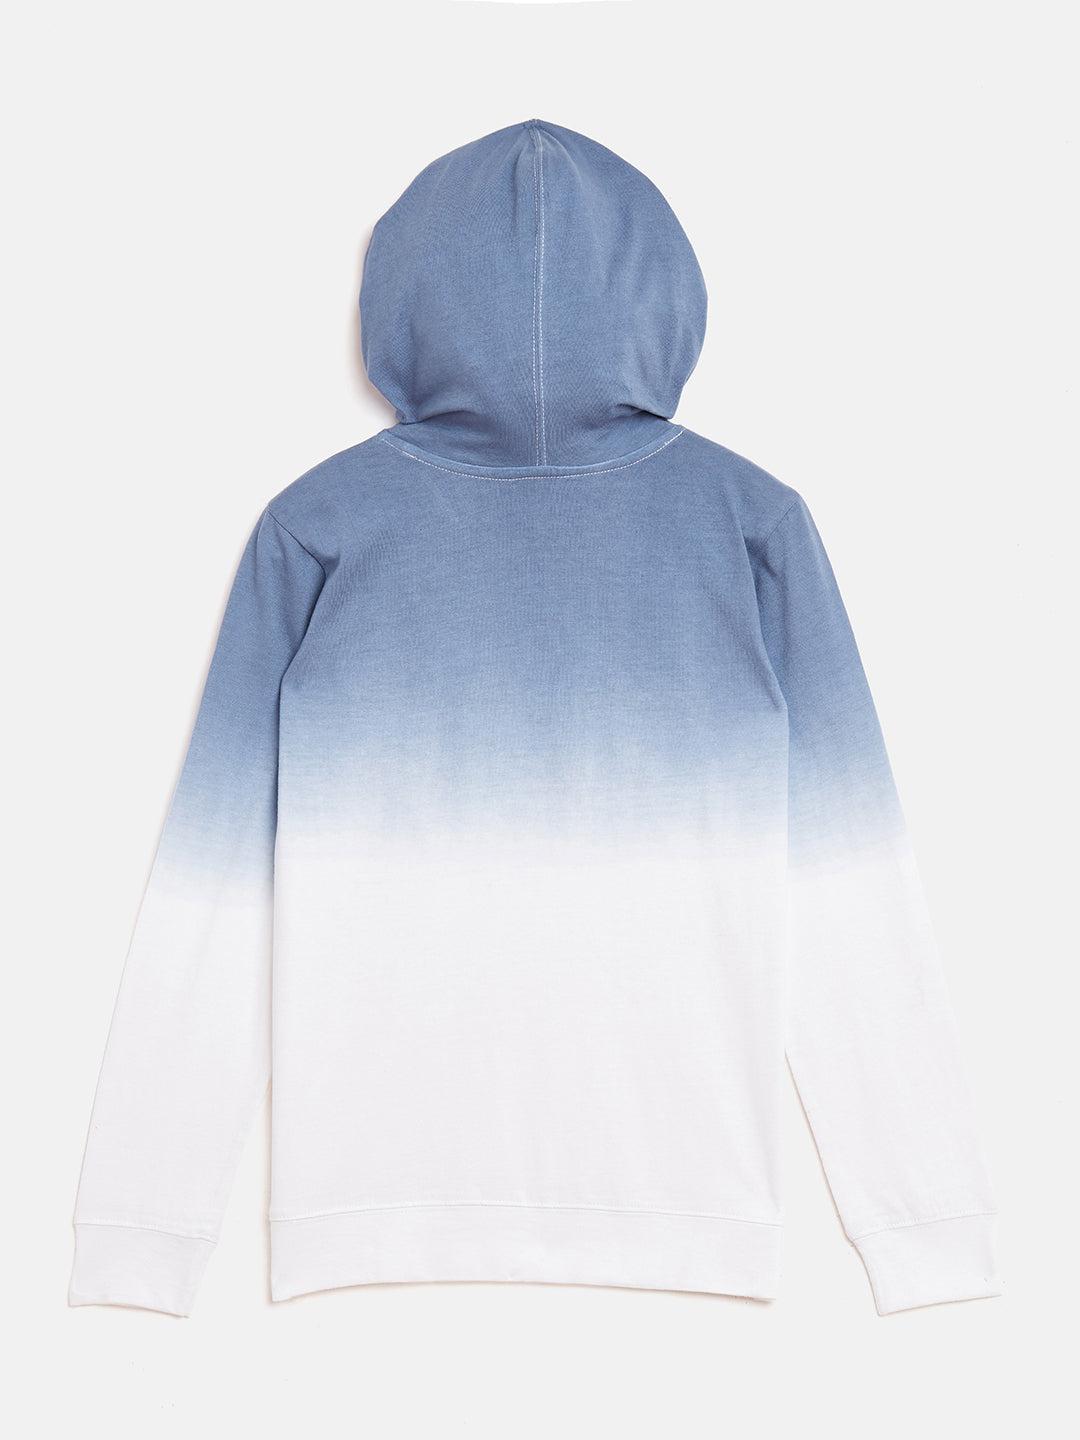 White/Blue Kids Full Sleeves Ombre Dyeing Hooded T-Shirt